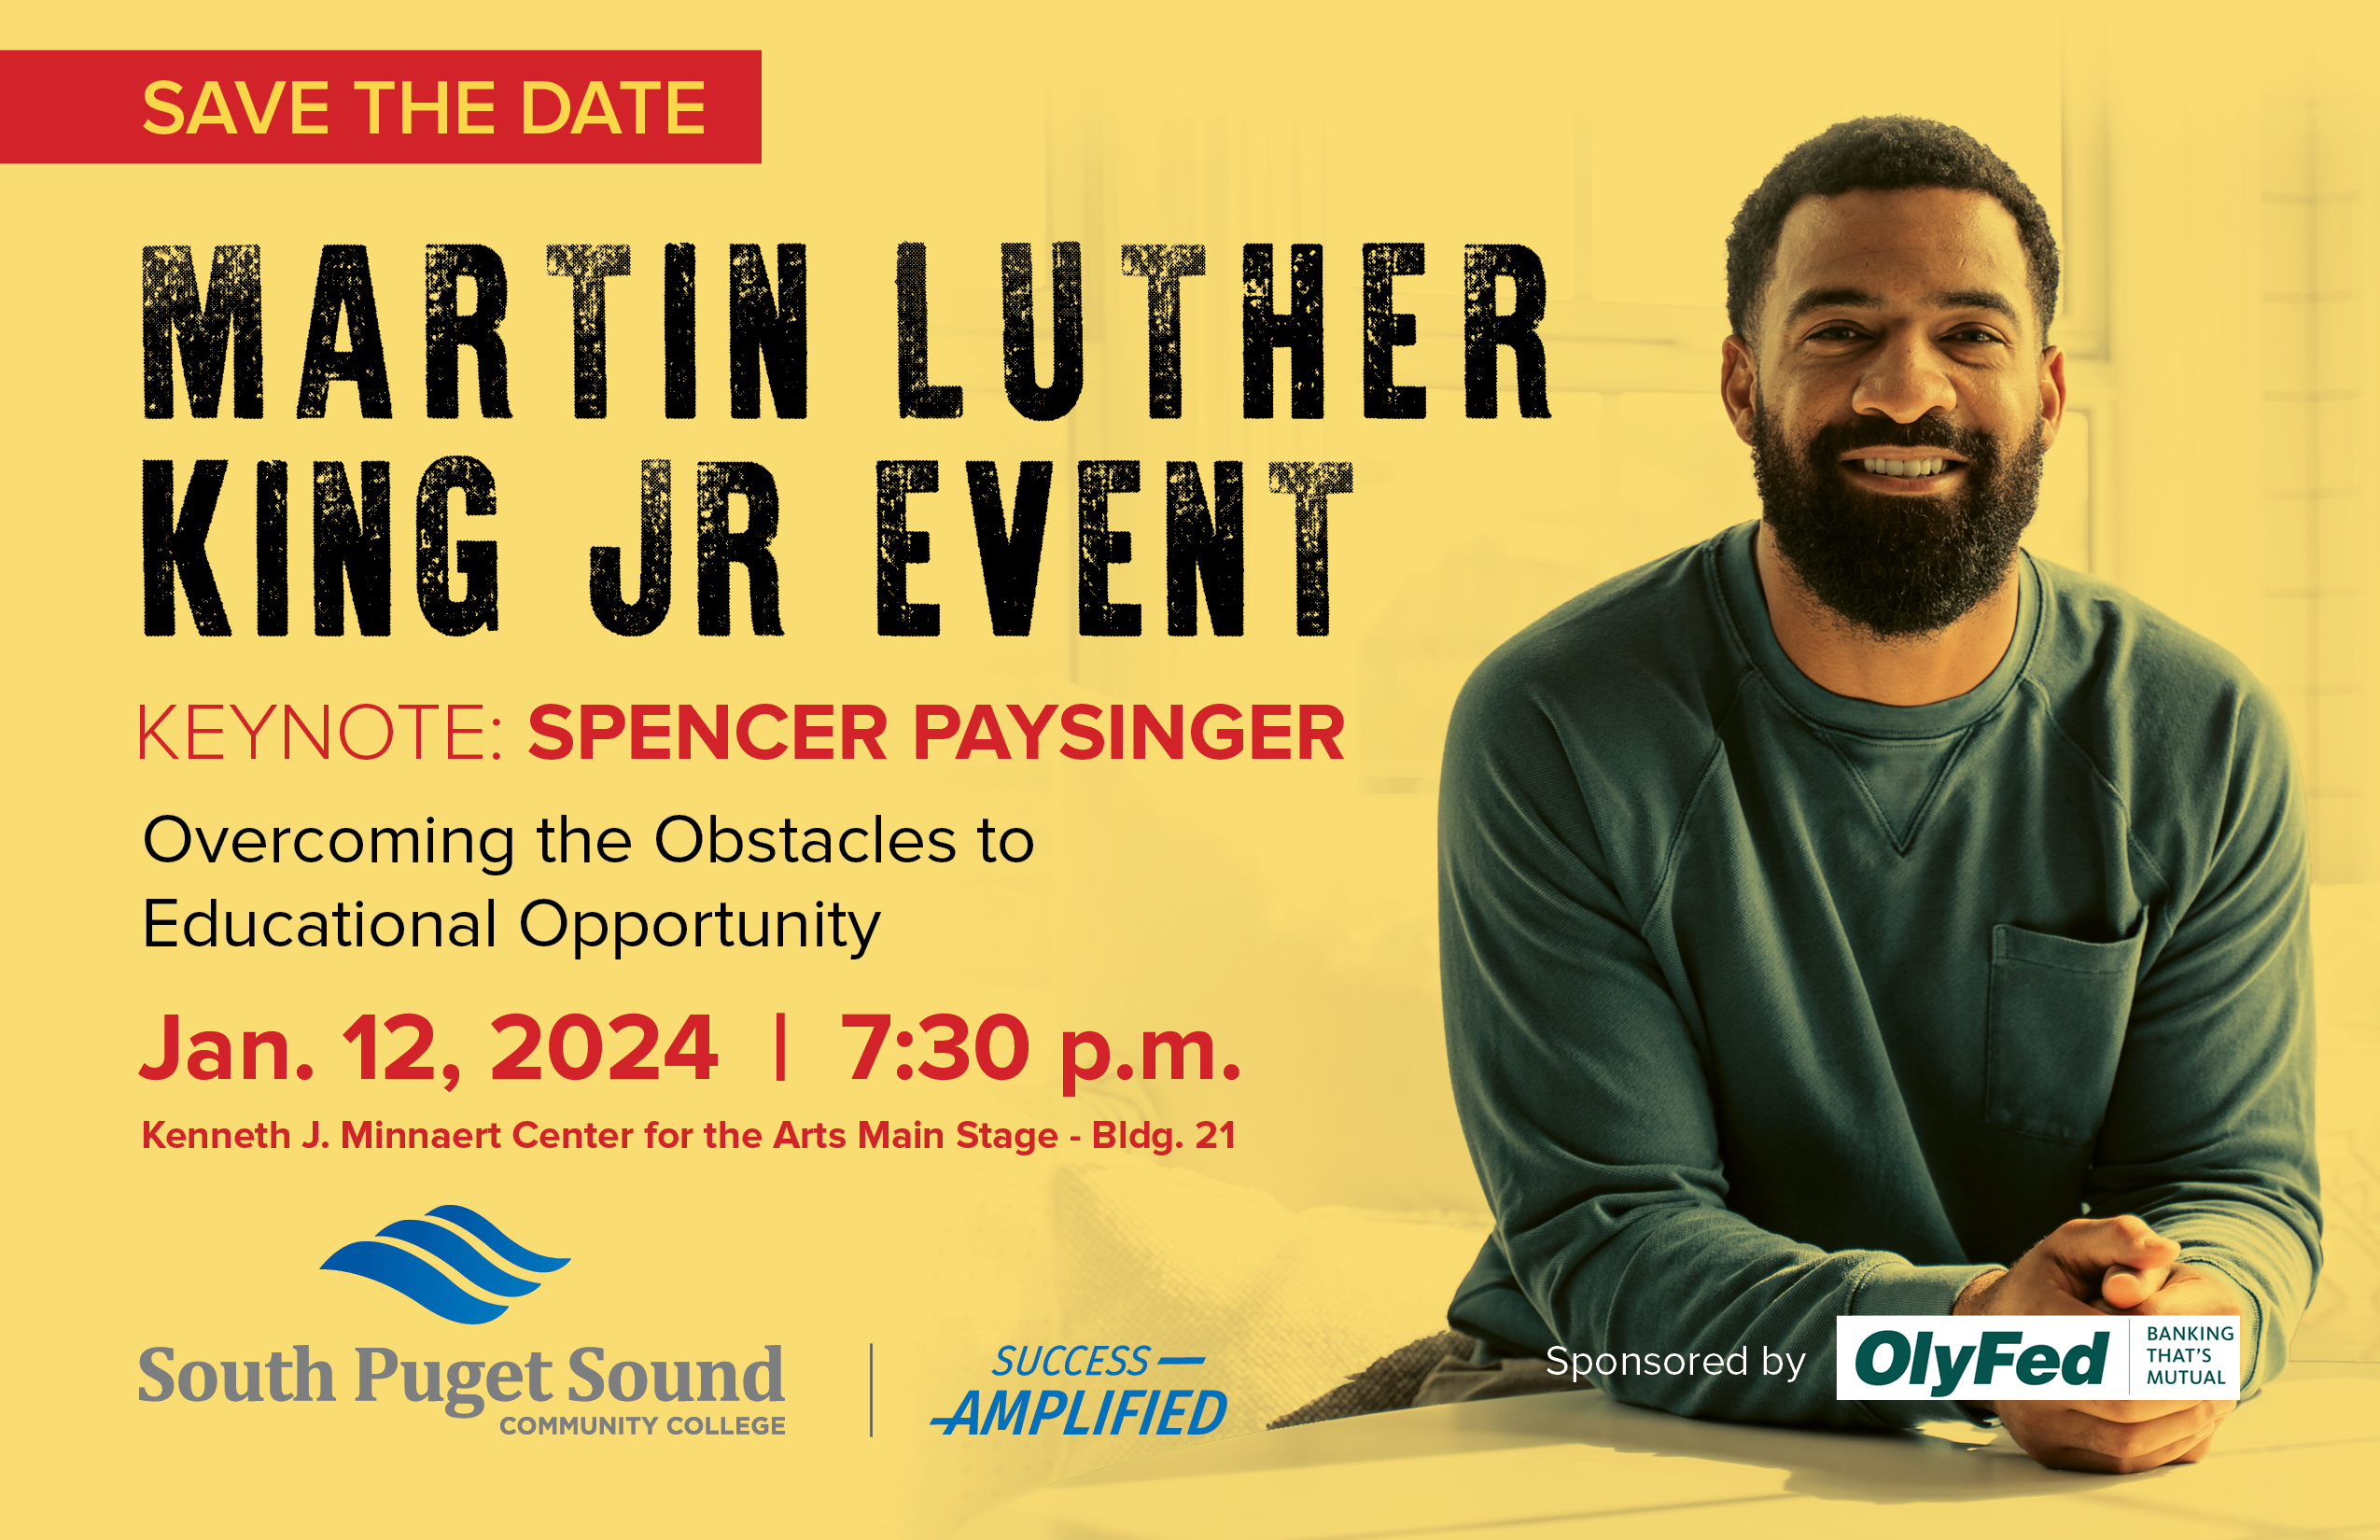 Save the Date: Martin Luther King Jr. Event. Keynote: Spencer Paysinger "Overcoming the Obstacles to Educational Opportunity" Jan. 12, 2024 | 7:30 p.m. Kenneth J. Minneart Center for the Arts Main Stage - Bldg. 21